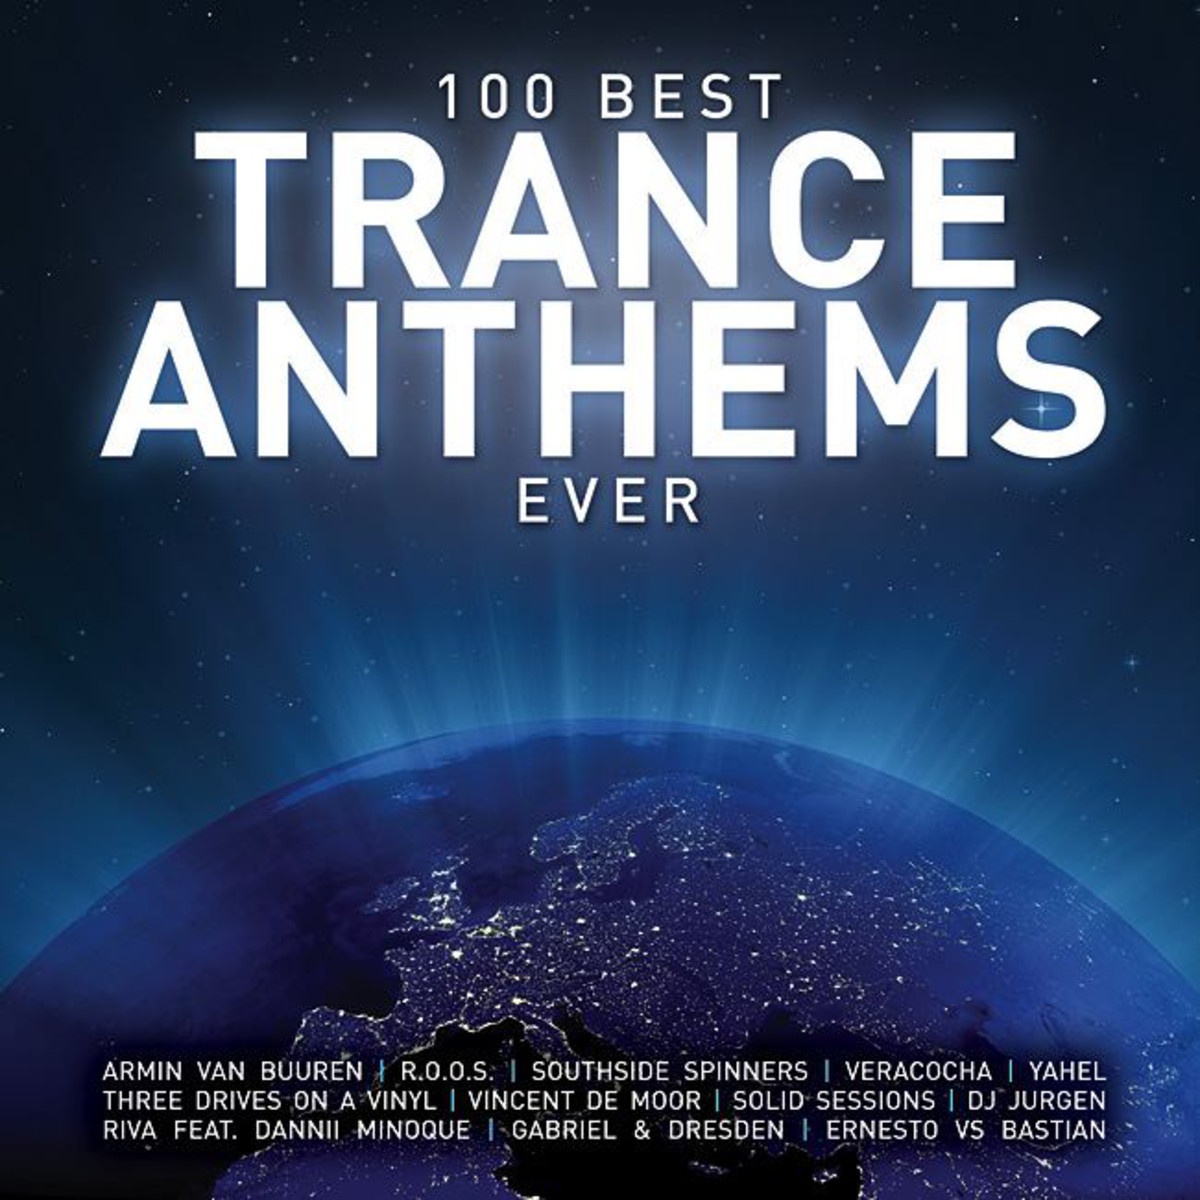 100 Best Trance Anthems Ever